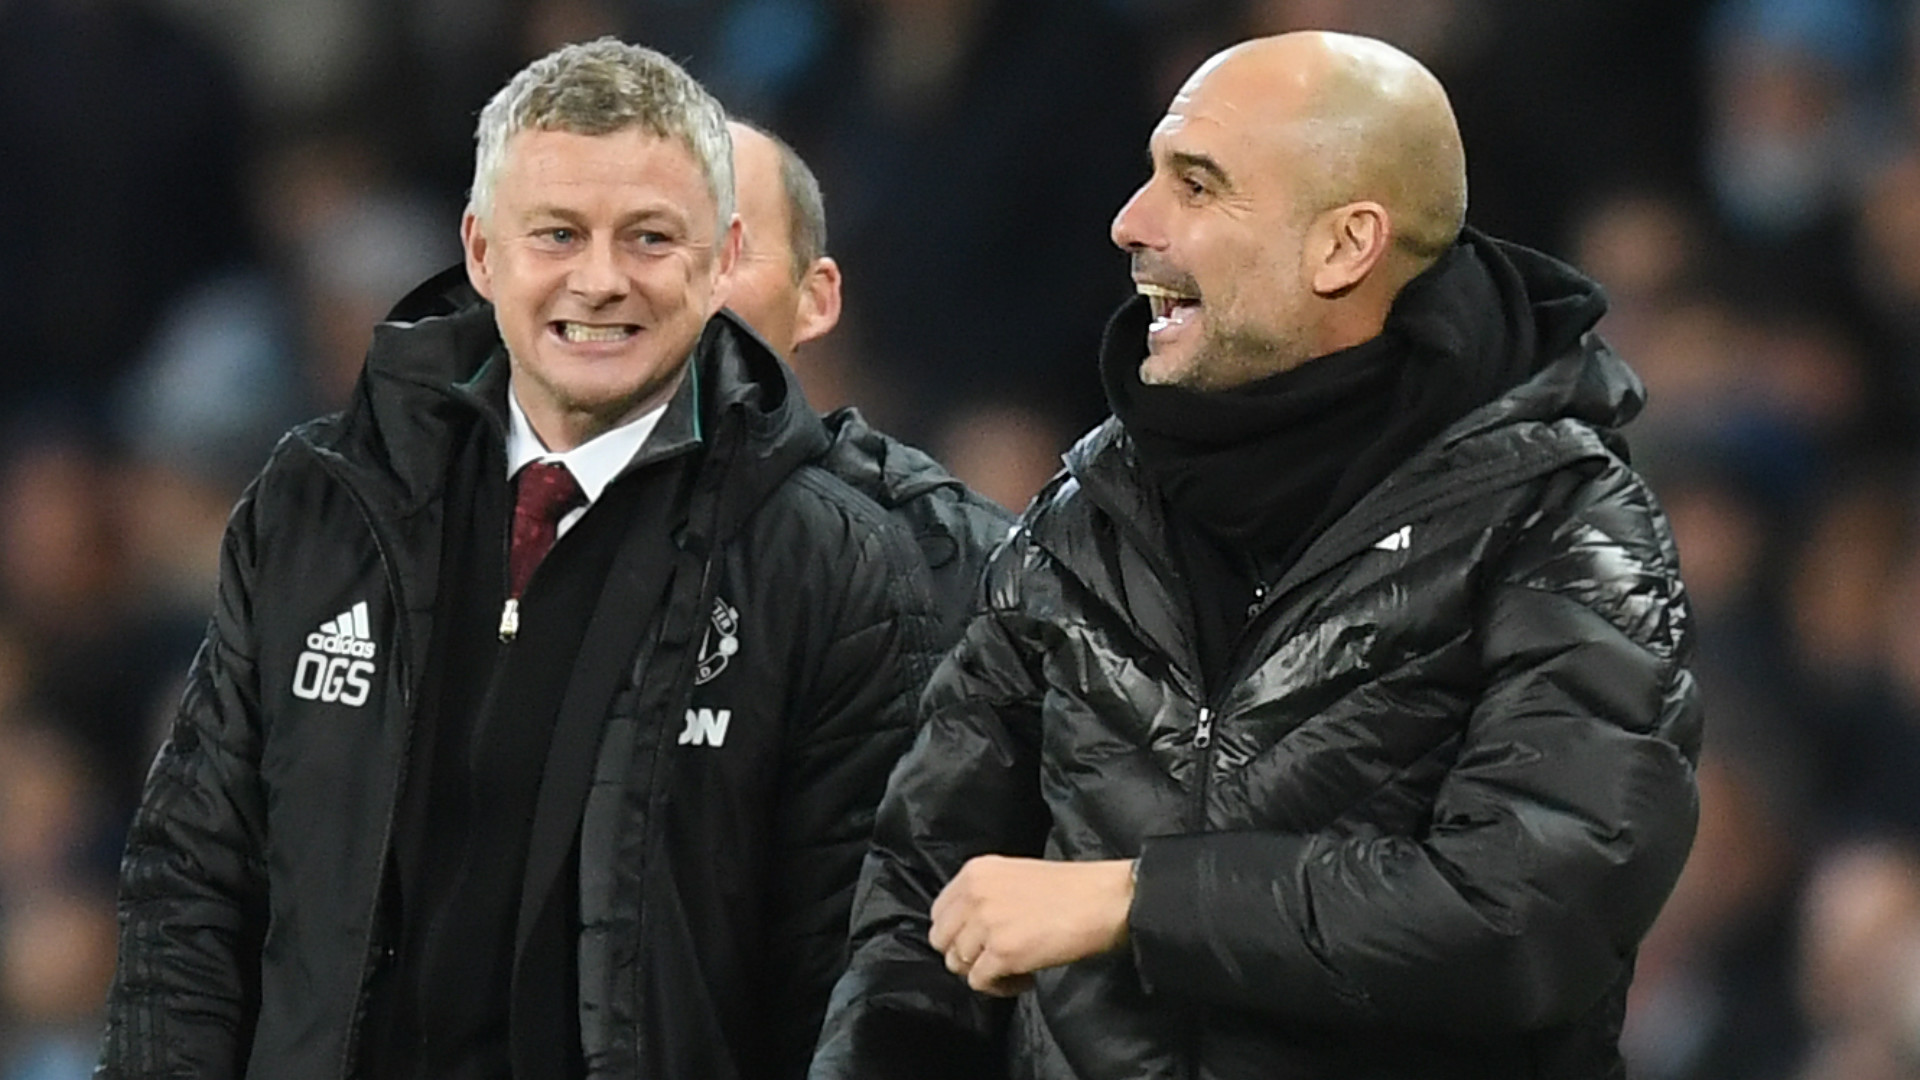 Man Utd one of the best teams when they run - Guardiola